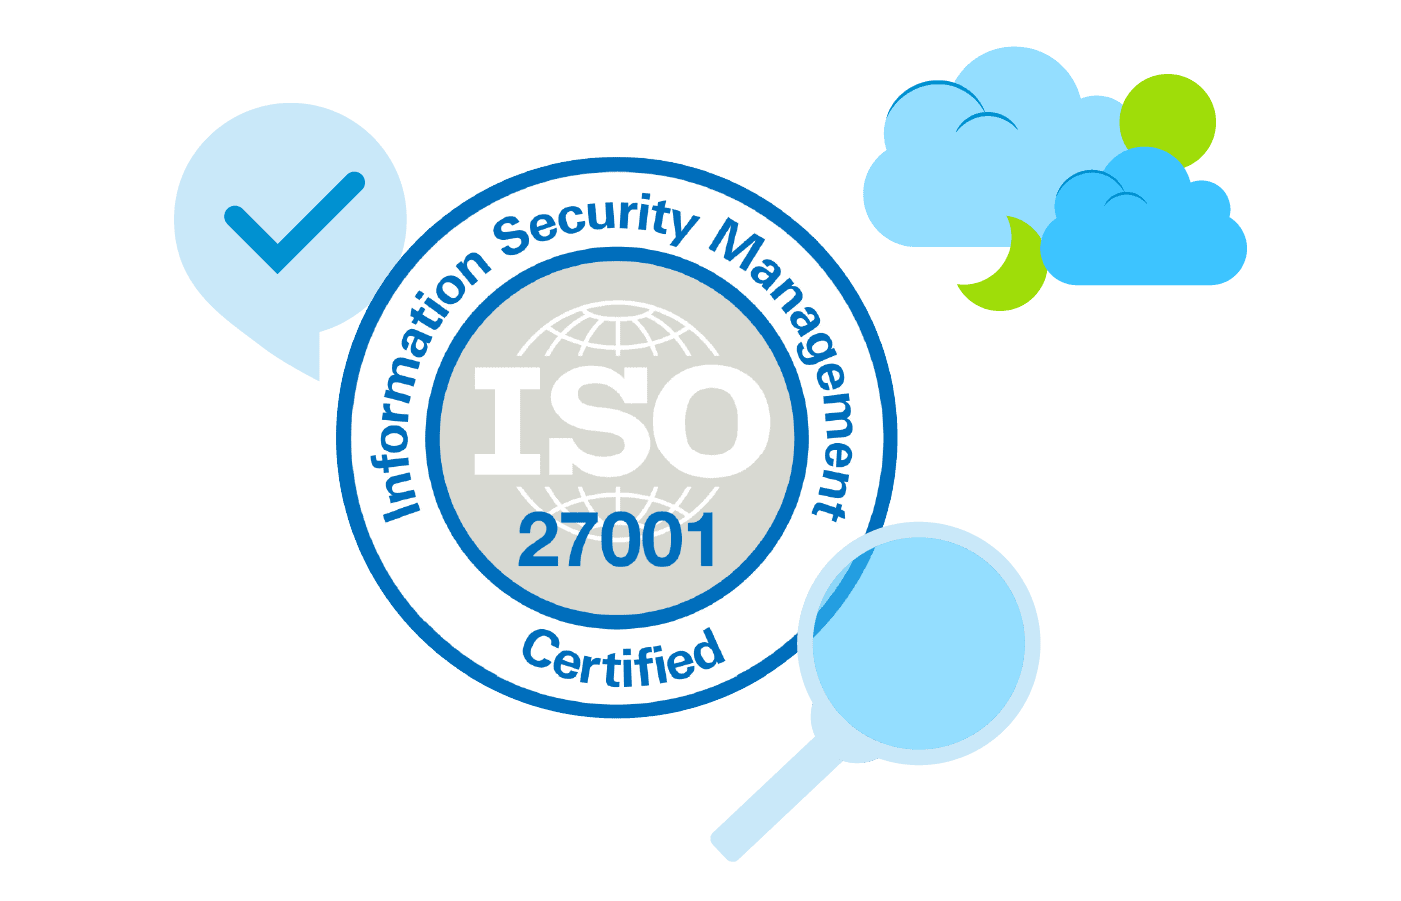 Comm100 live chat is ISO 27001 Compliant